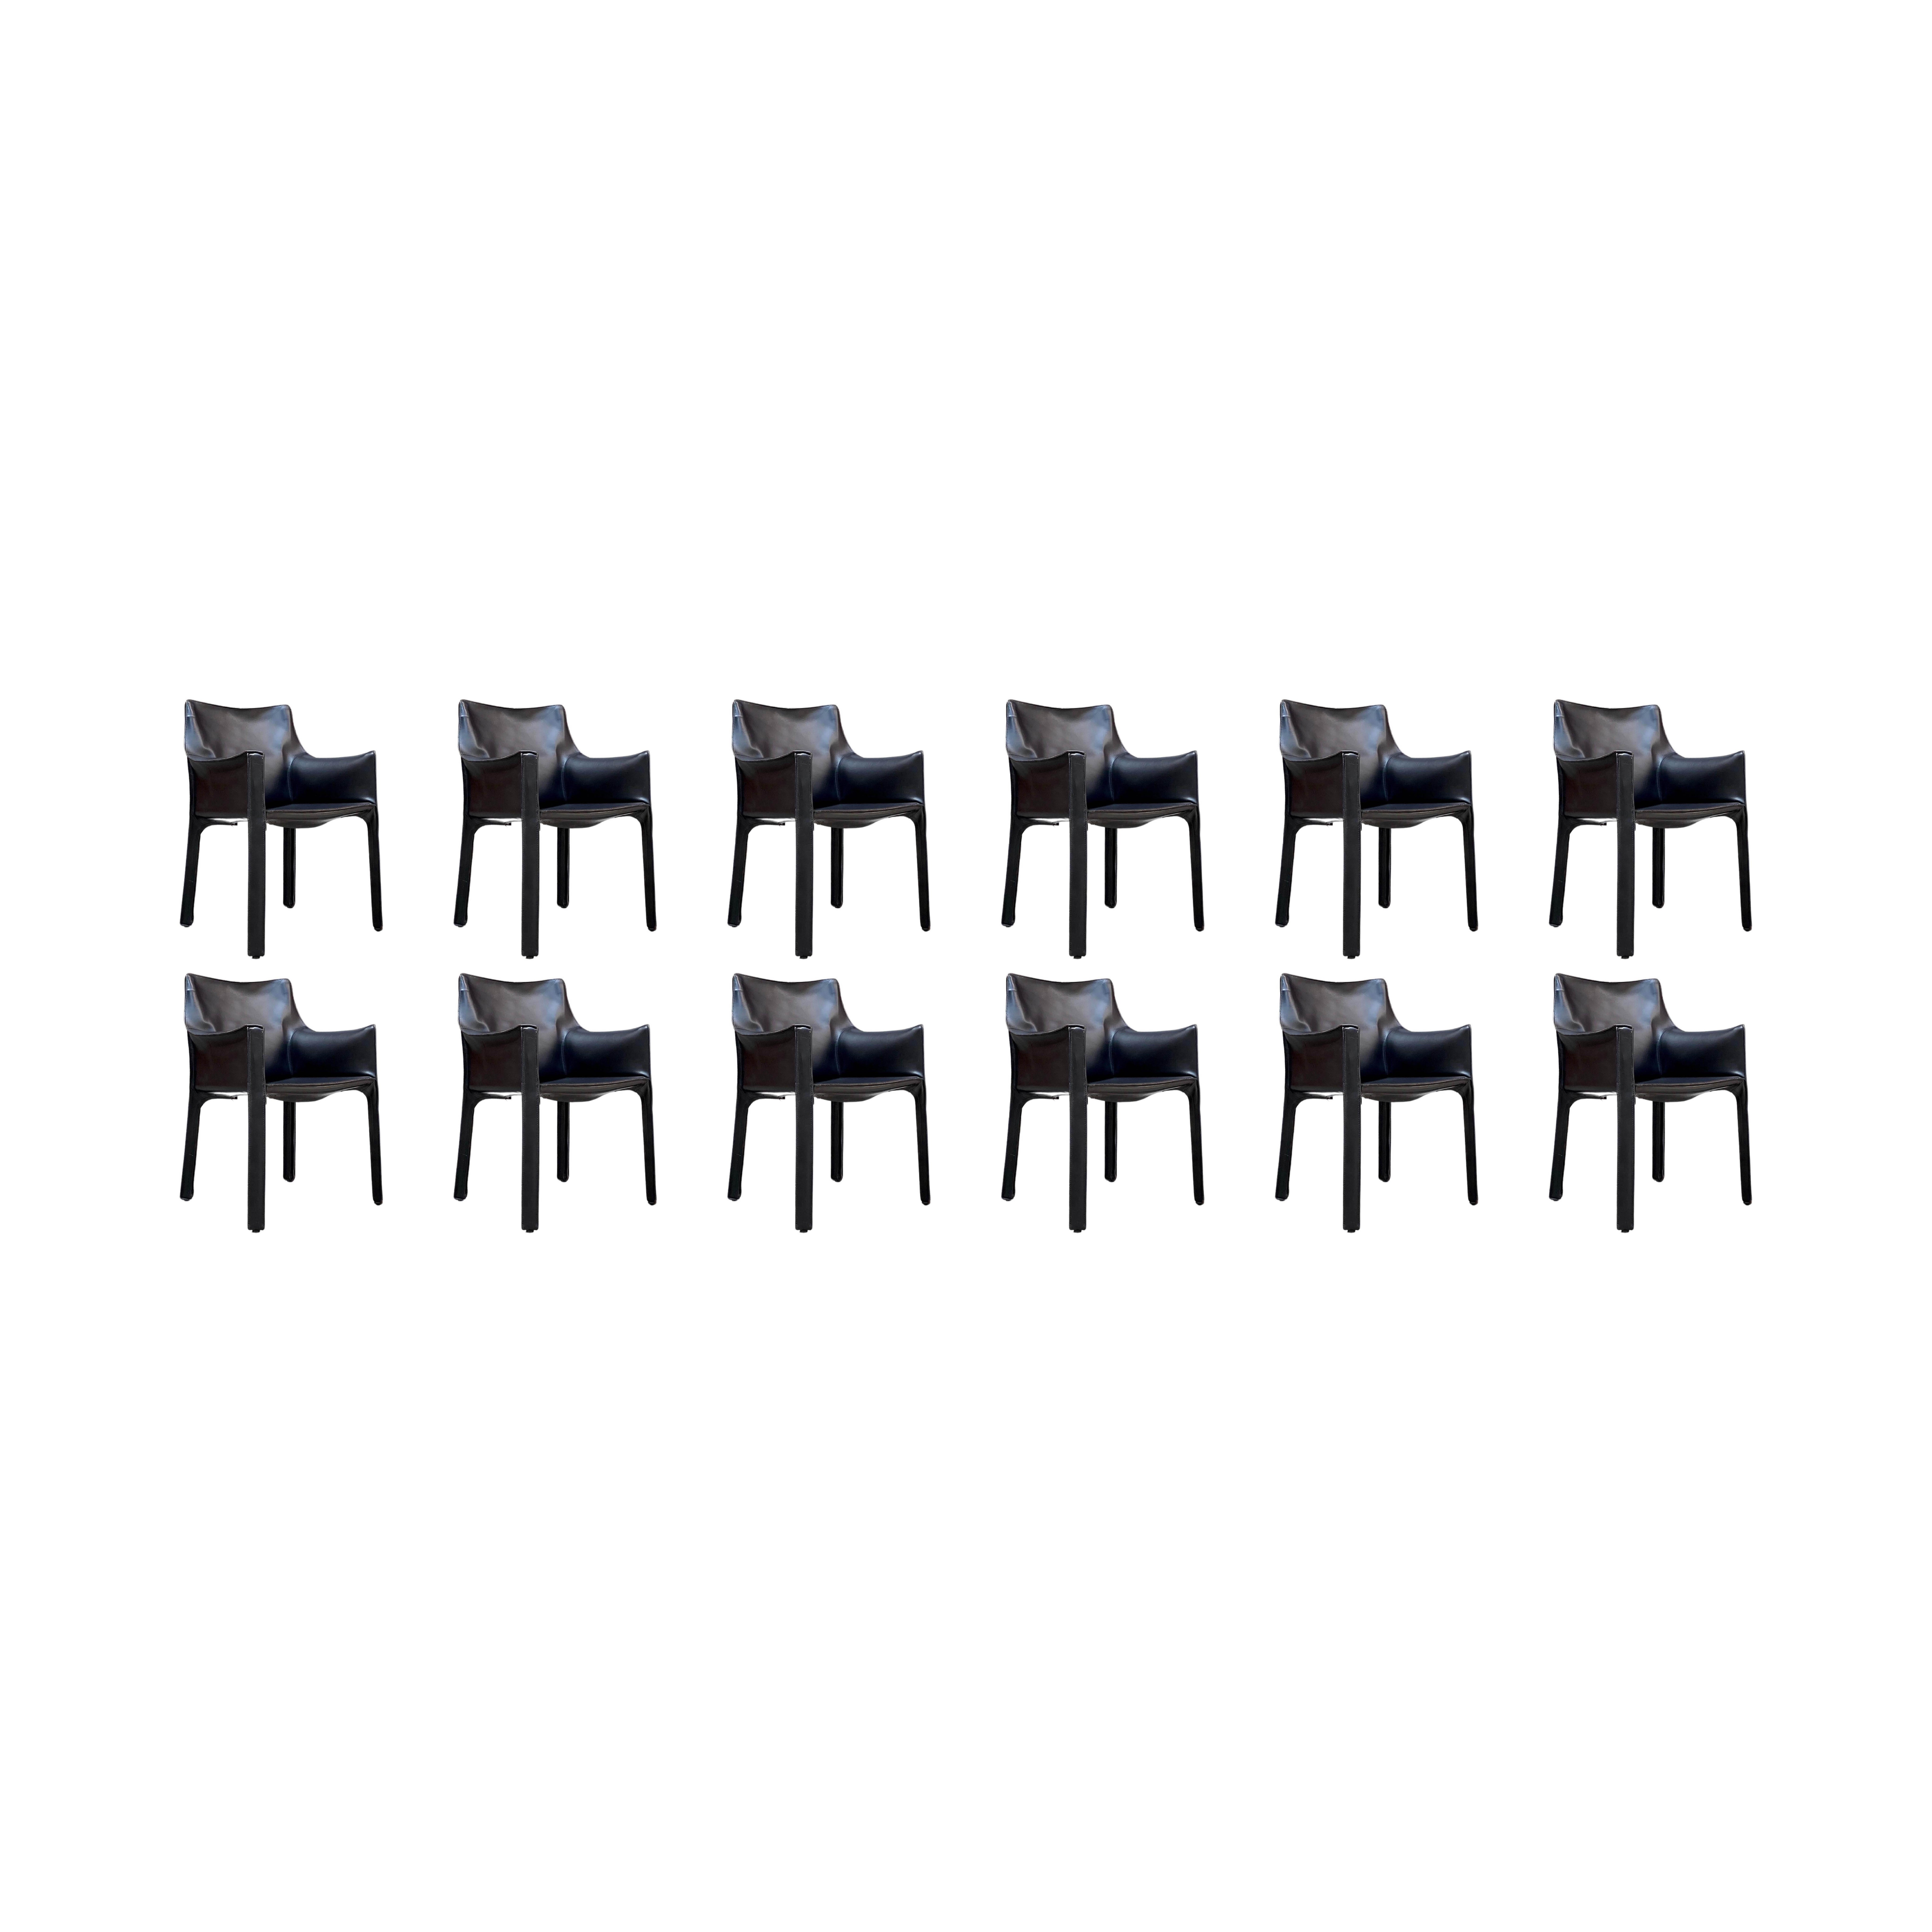 Mario Bellini "CAB 413" Dining Chairs for Cassina, 1977, Set of 12